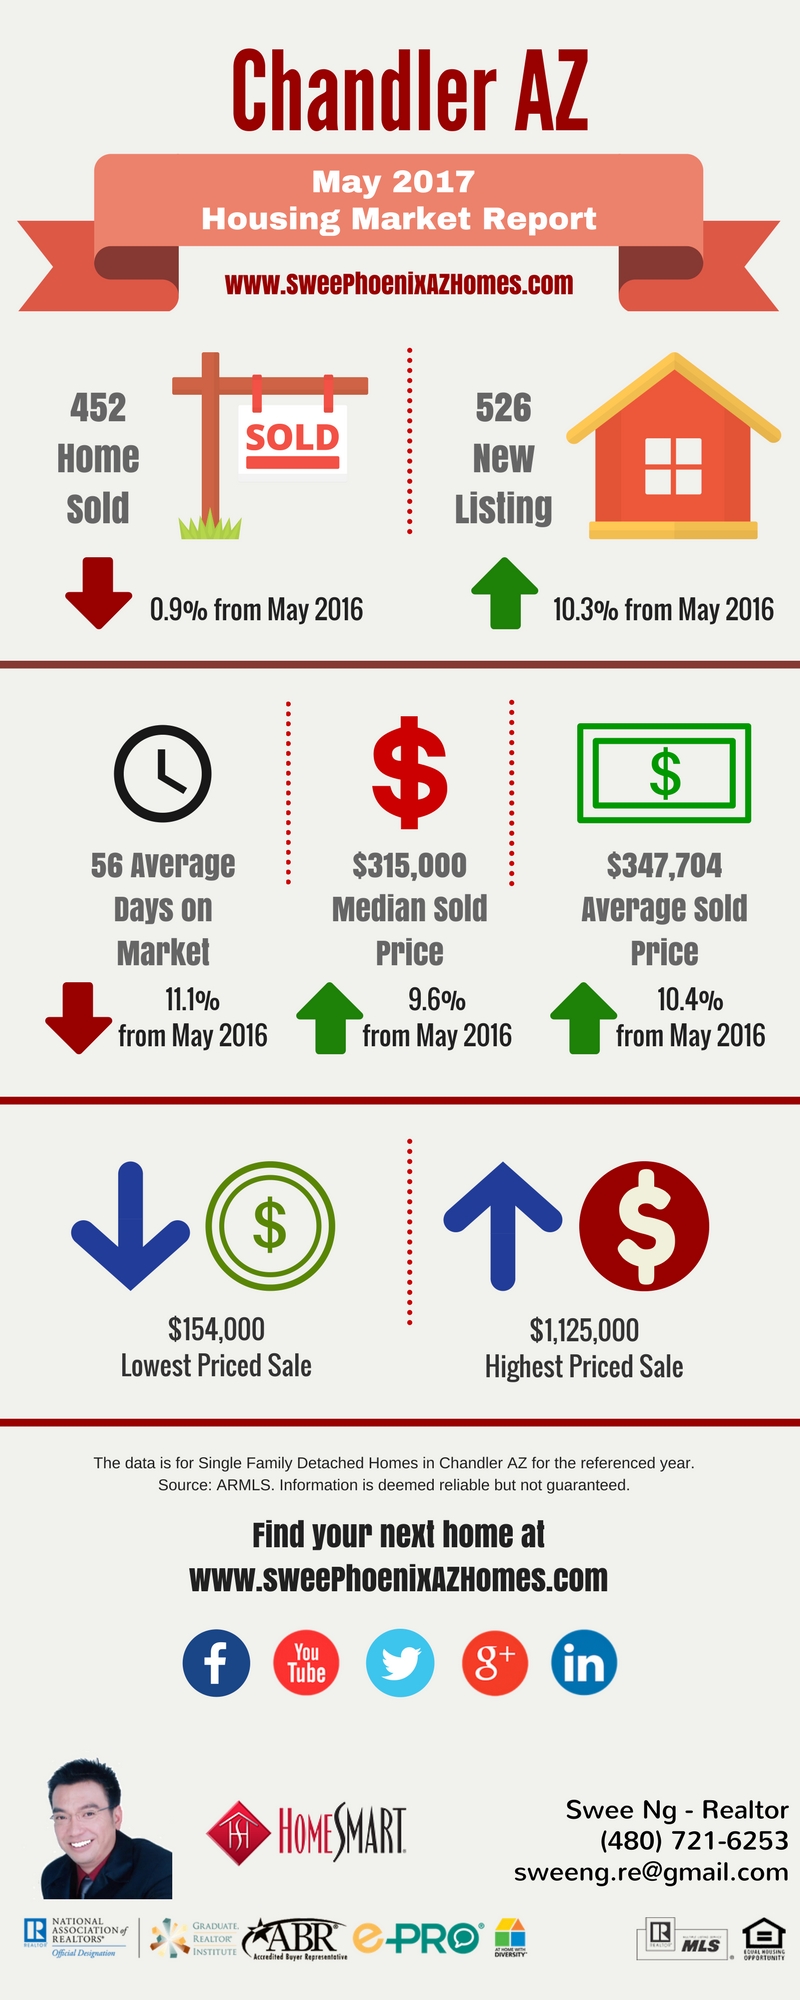 Chandler AZ Housing Market Update May 2017 by Swee Ng, House Value and Real Estate Listings